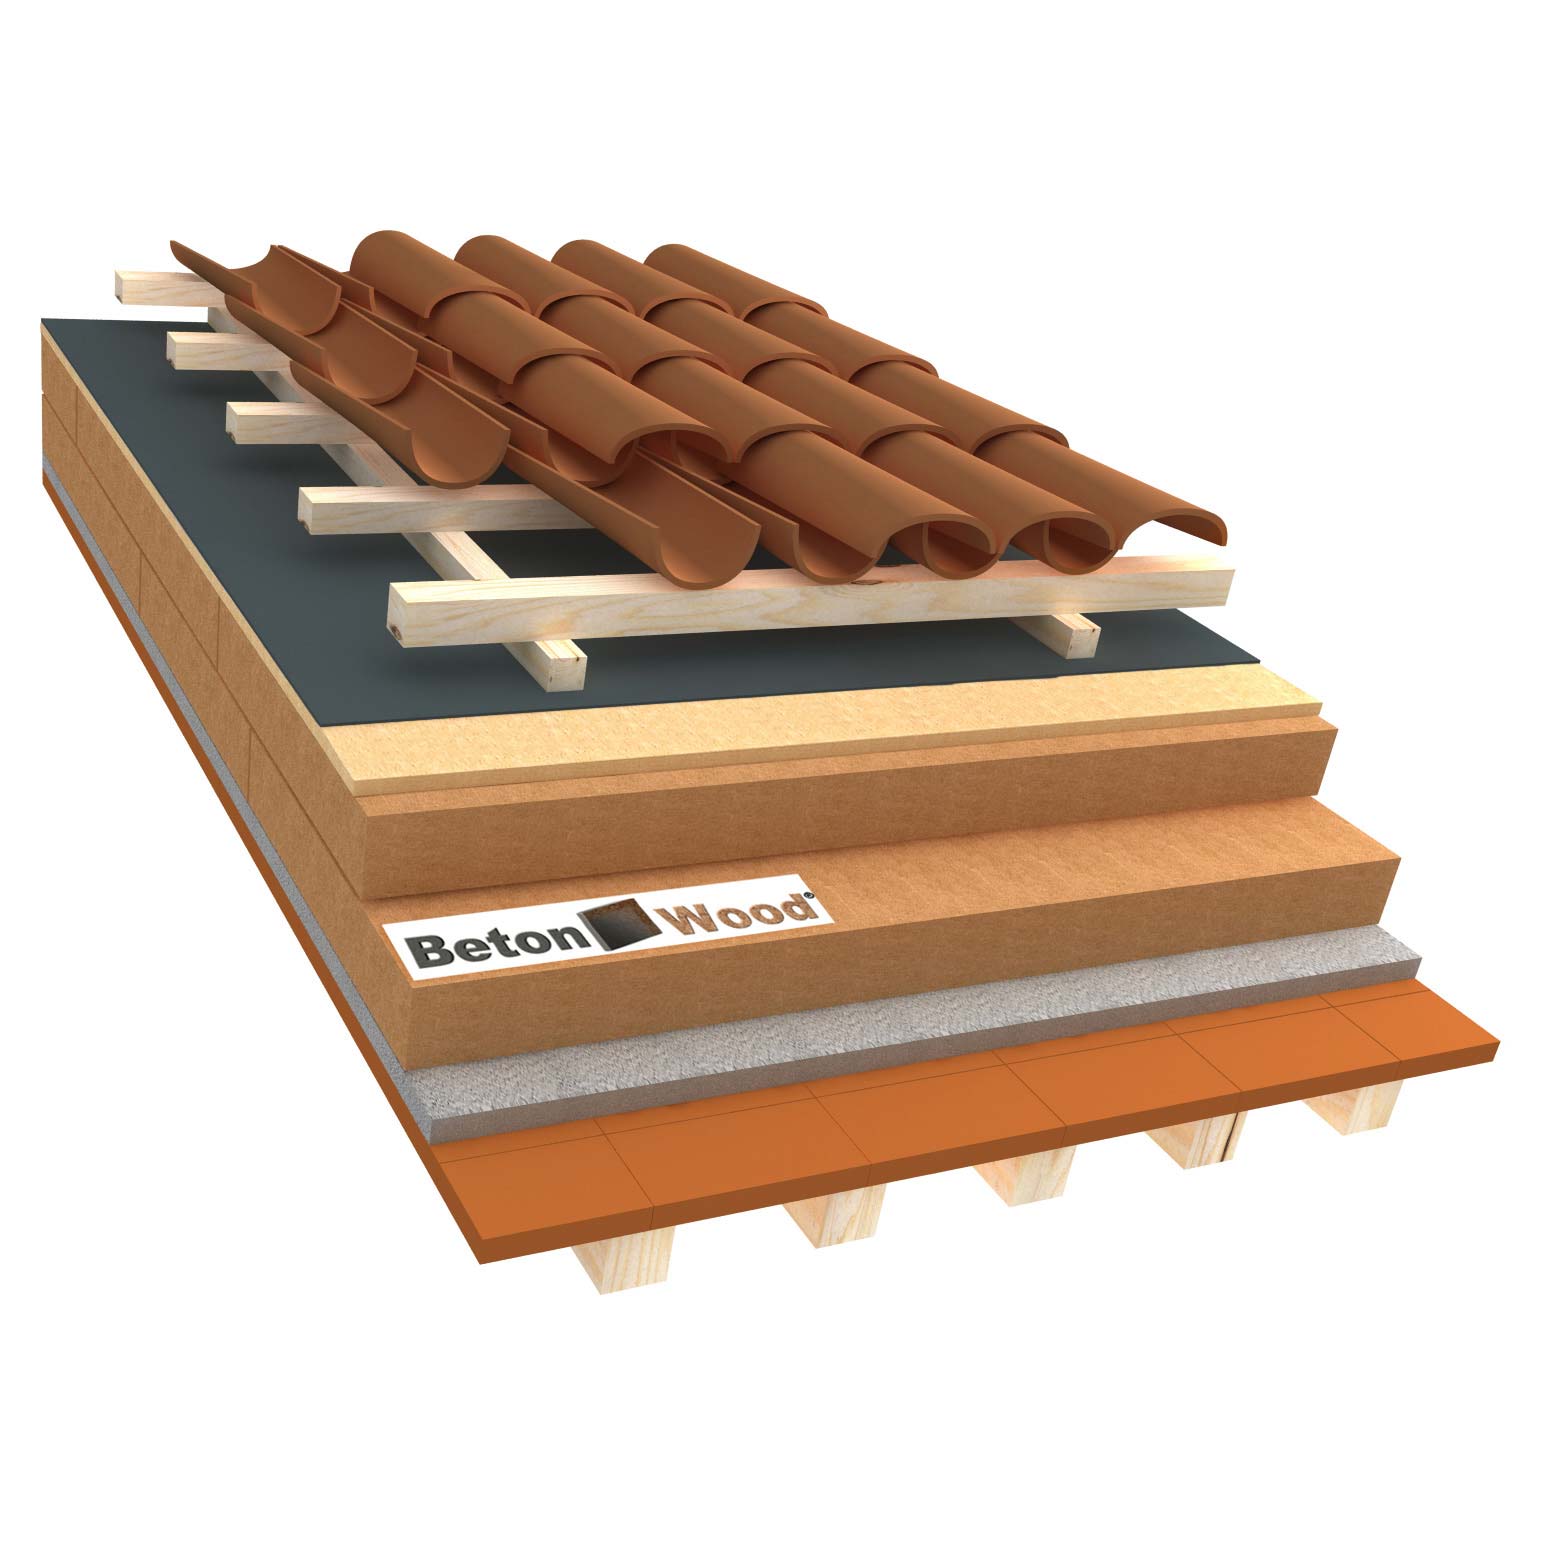 Ventilated roof with wood fiber Isorel and Therm SD on terracotta tiles